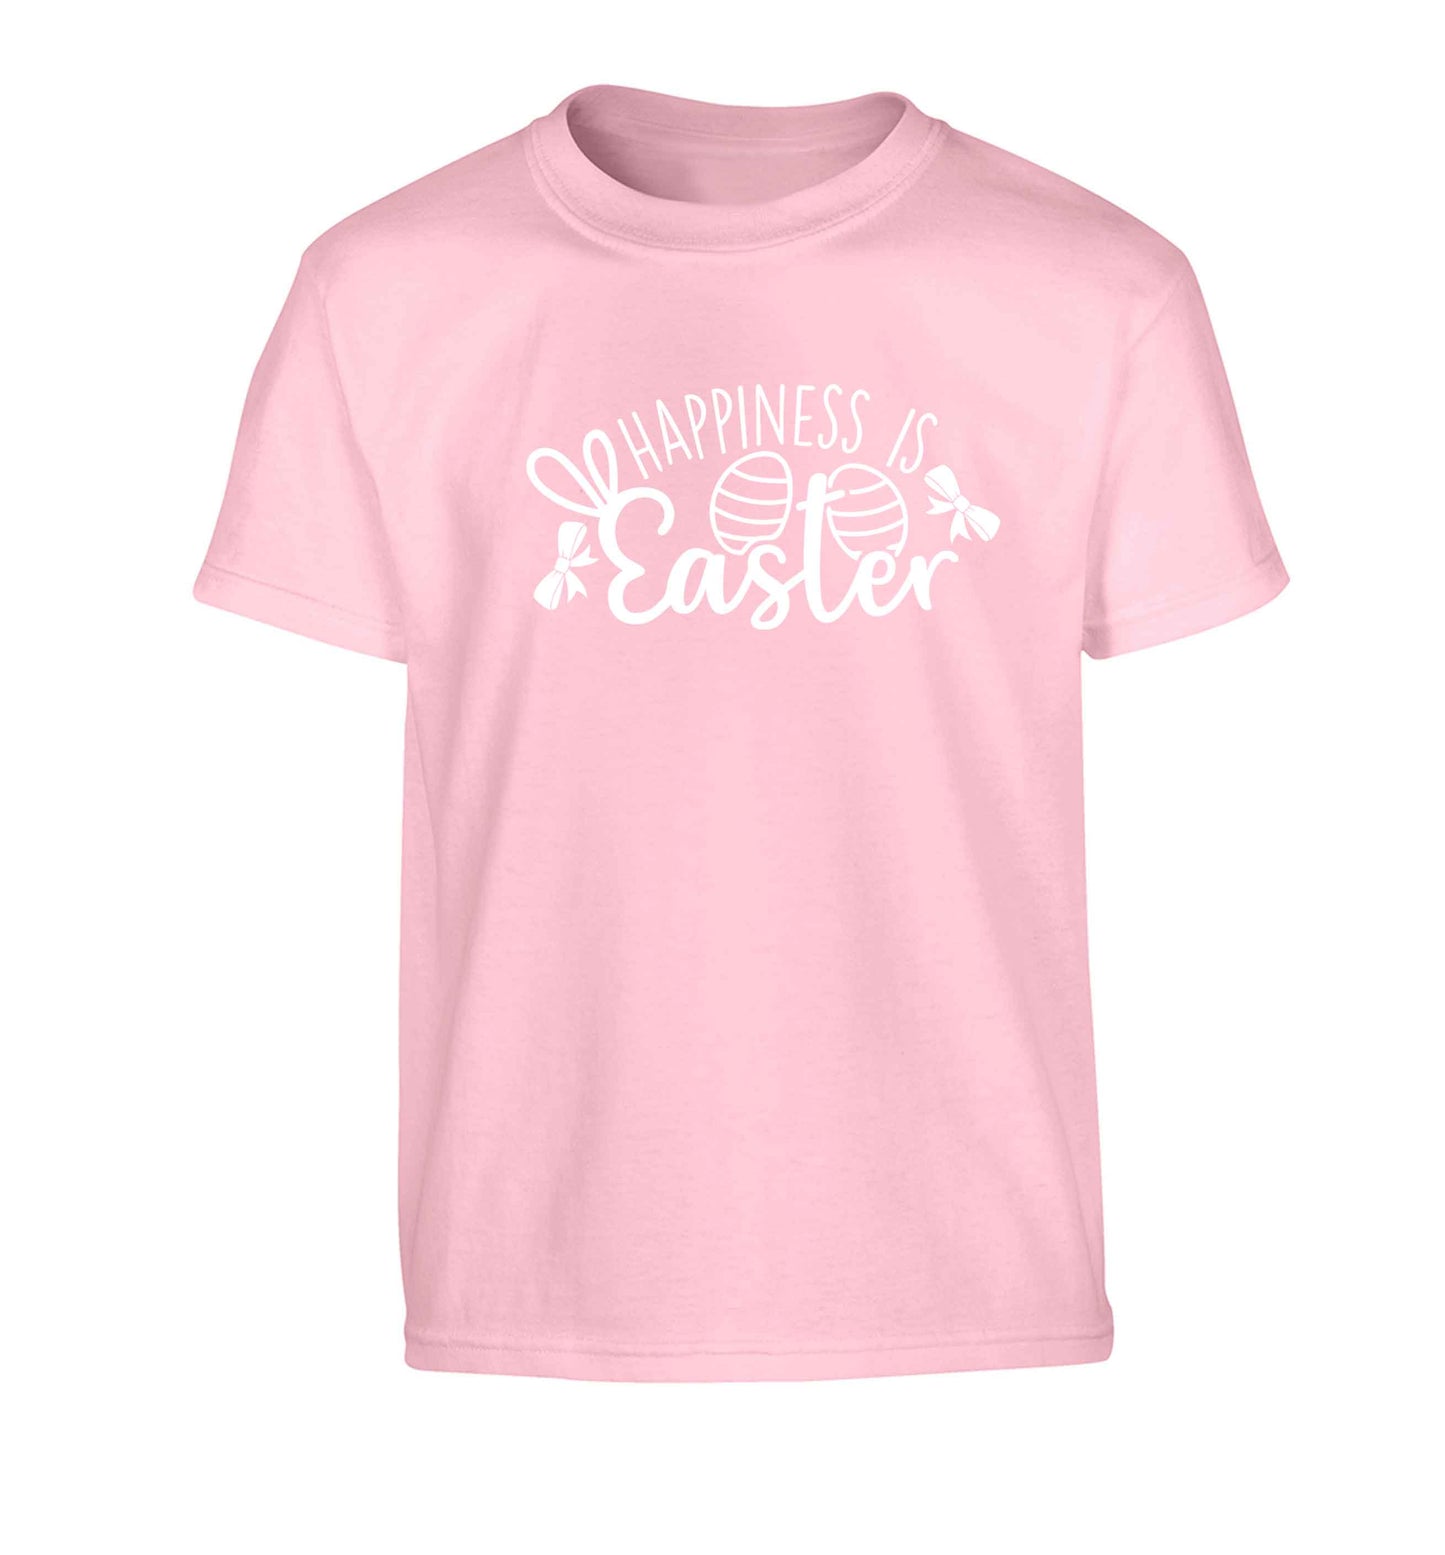 Happiness is easter Children's light pink Tshirt 12-13 Years